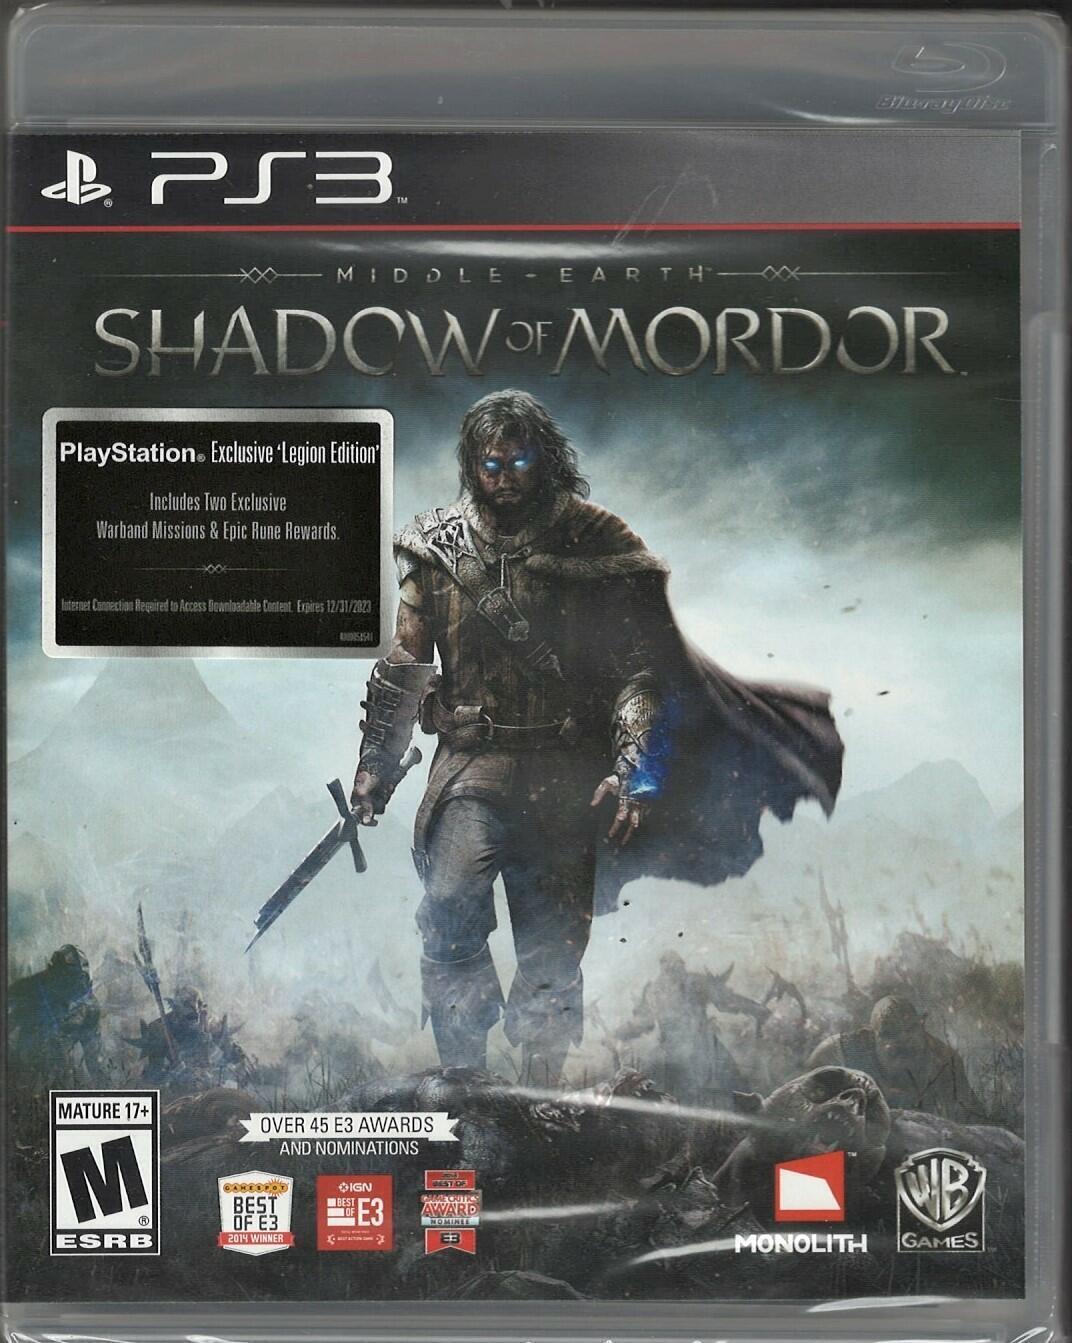 Middle Earth: Shadow of Mordor (PS3), Análise